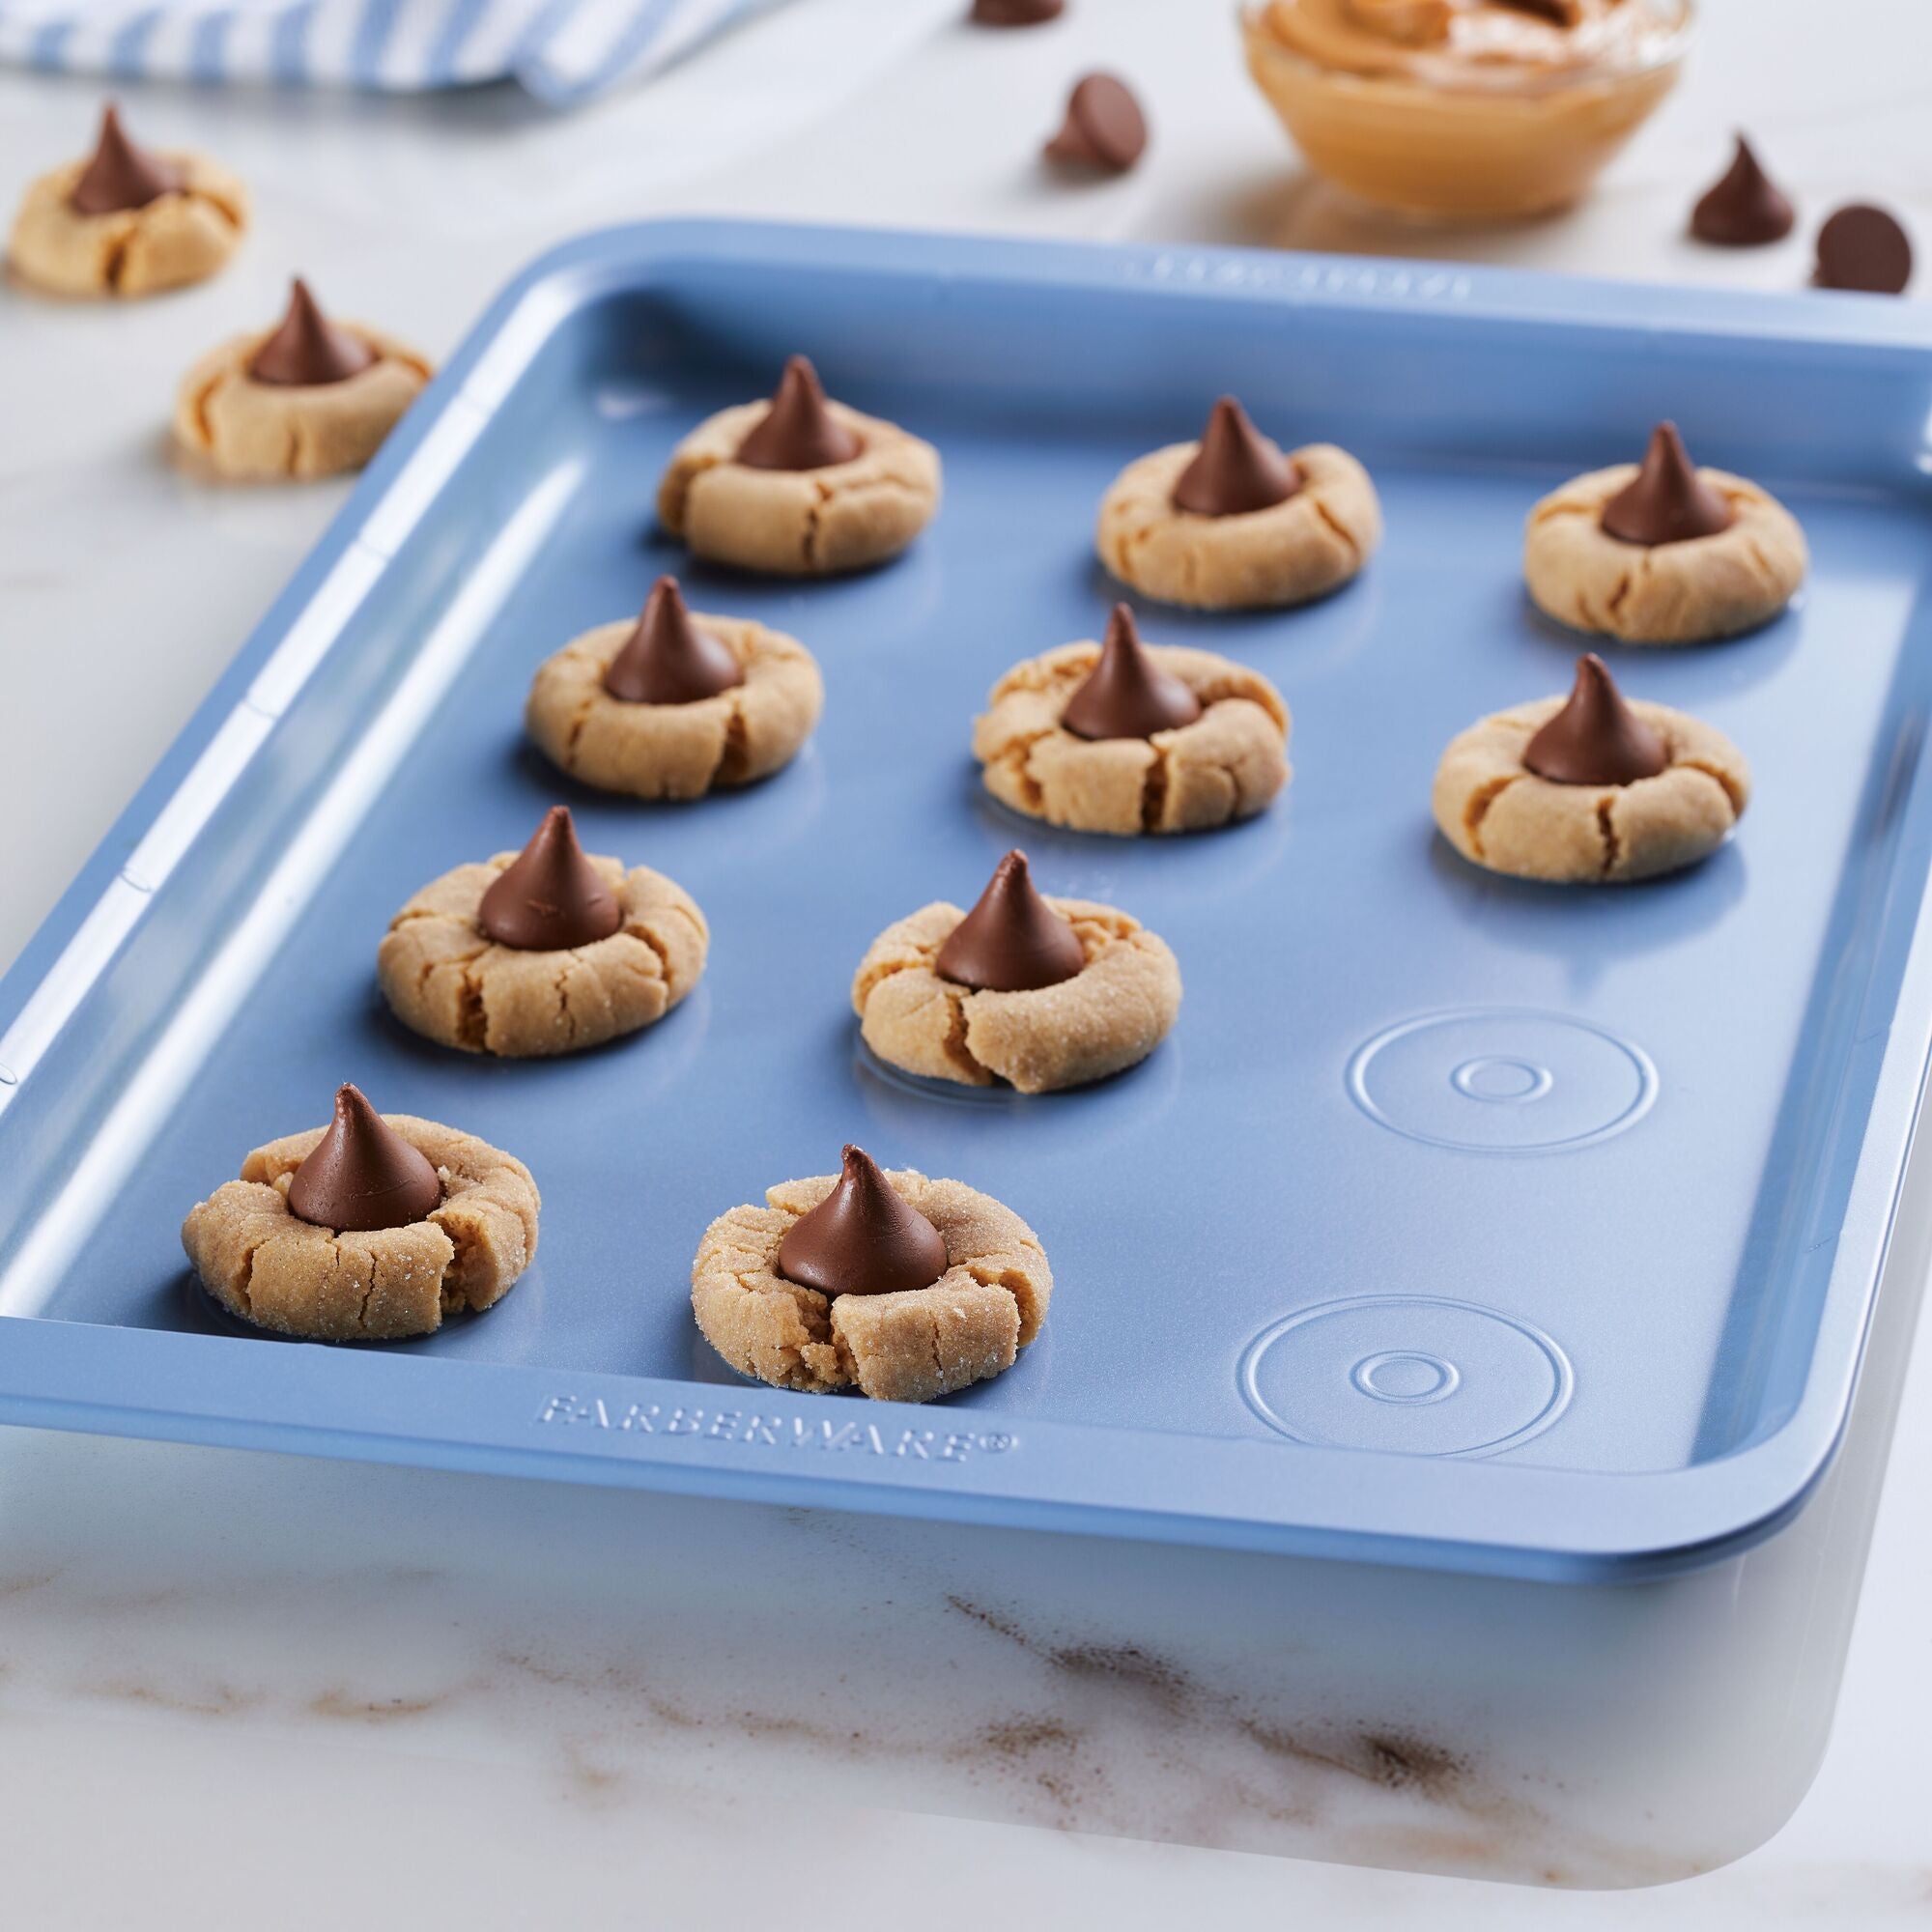 Newly Baking Sheets for Oven Nonstick Cookie Sheet Baking Tray